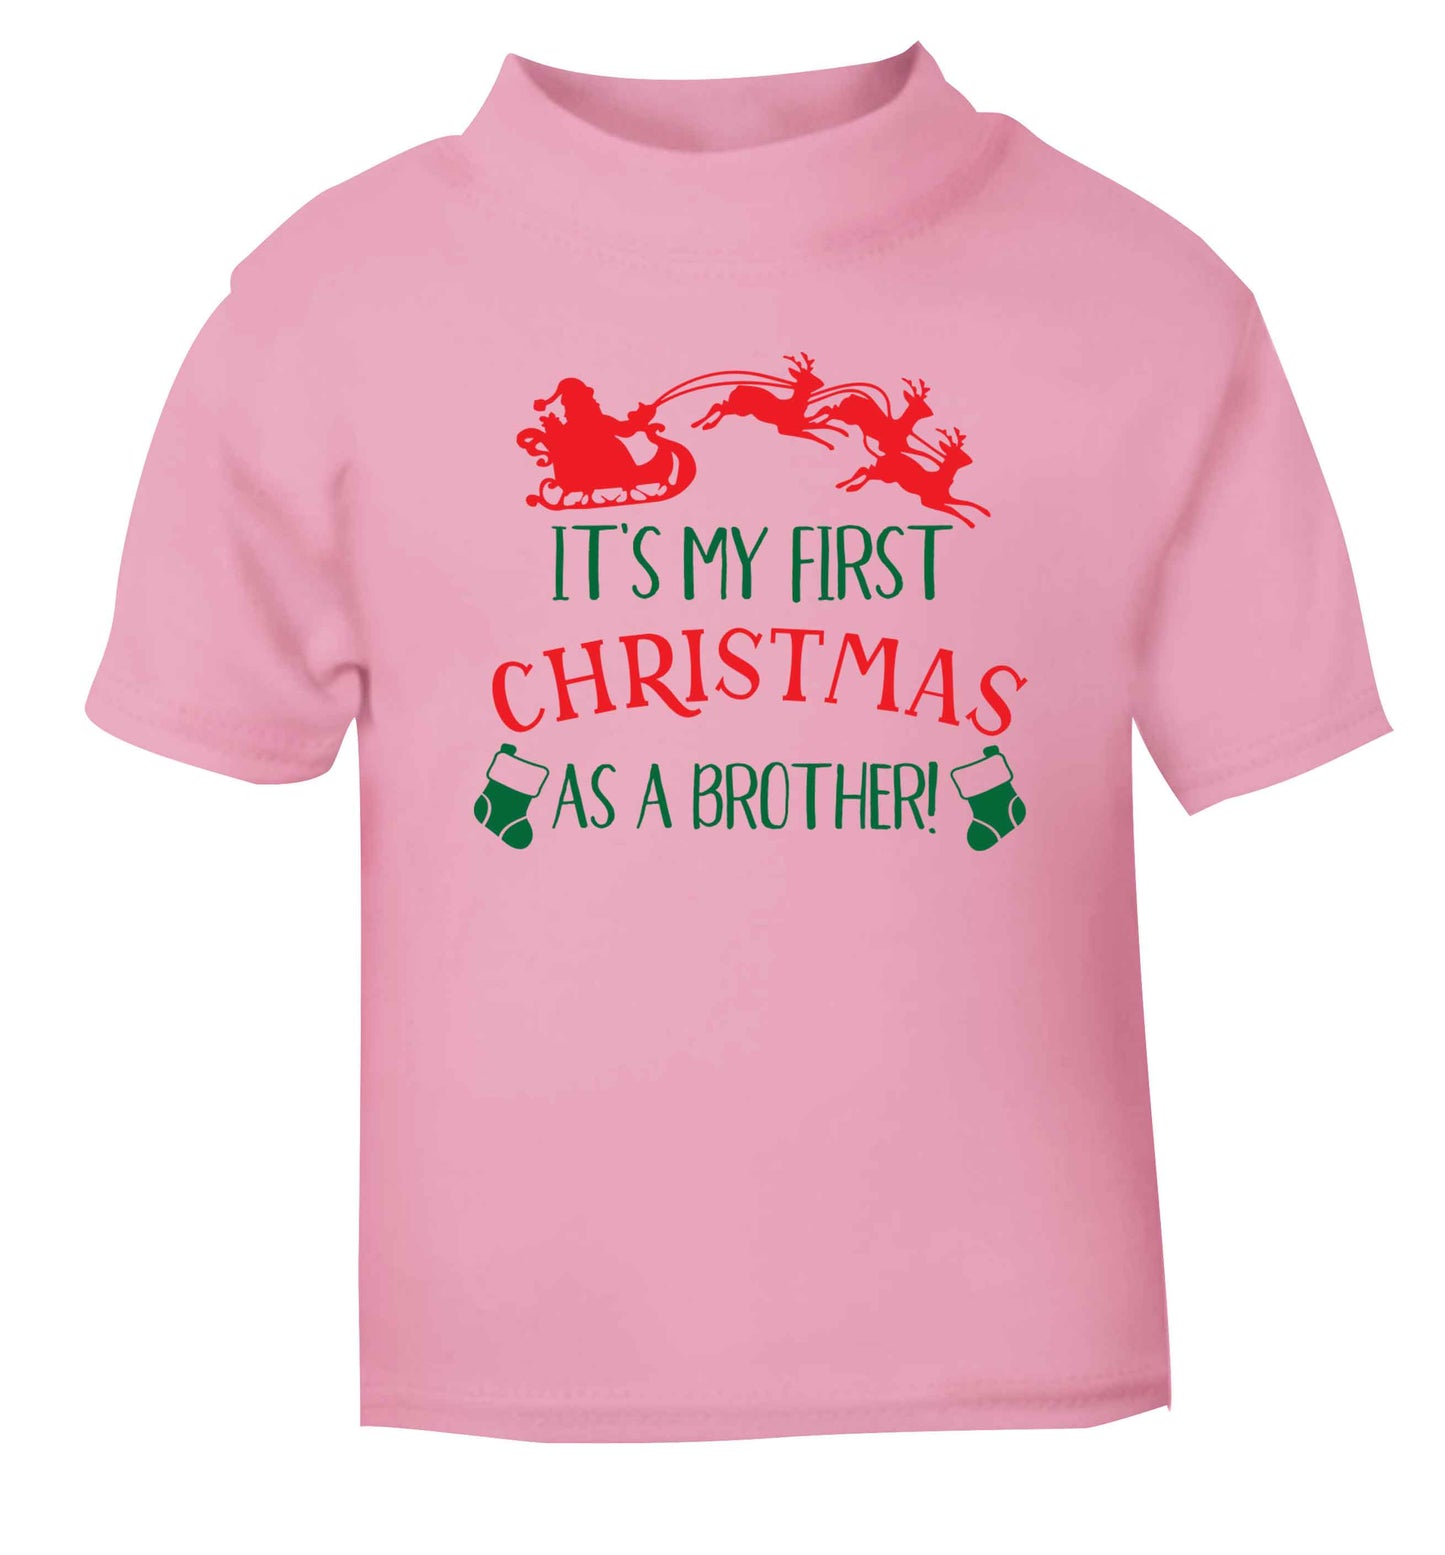 It's my first Christmas as a brother! light pink Baby Toddler Tshirt 2 Years